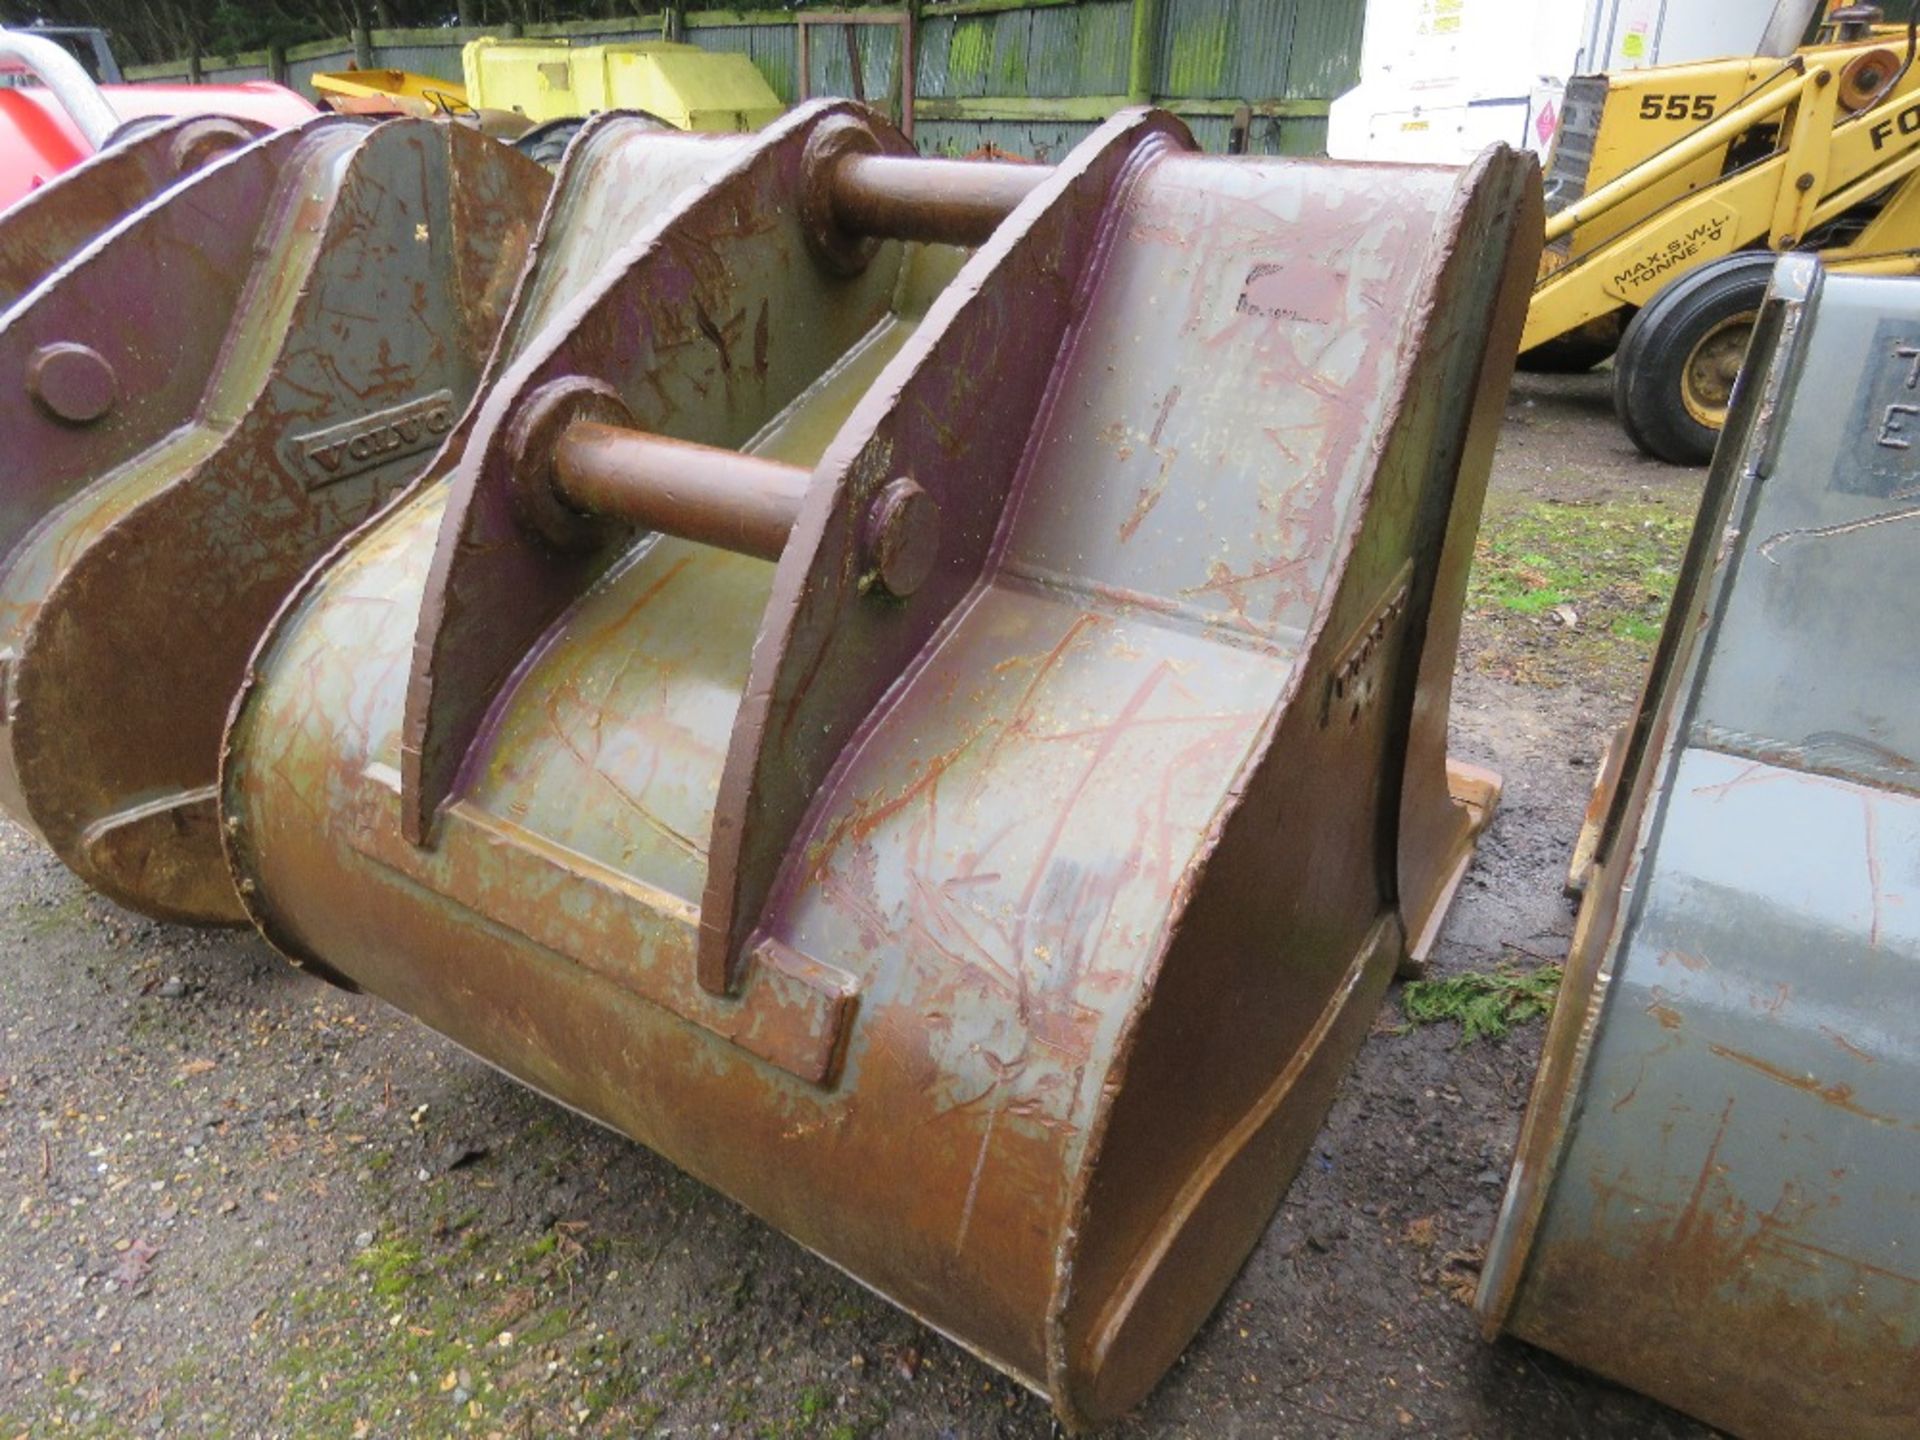 GENUINE VOLVO EXCAVATOR BUCKET SUITABLE FOR 35TONNE EXCAVATOR ON 90MM PINS. 1.2M WIDTH APPROX. APPEA - Image 4 of 4